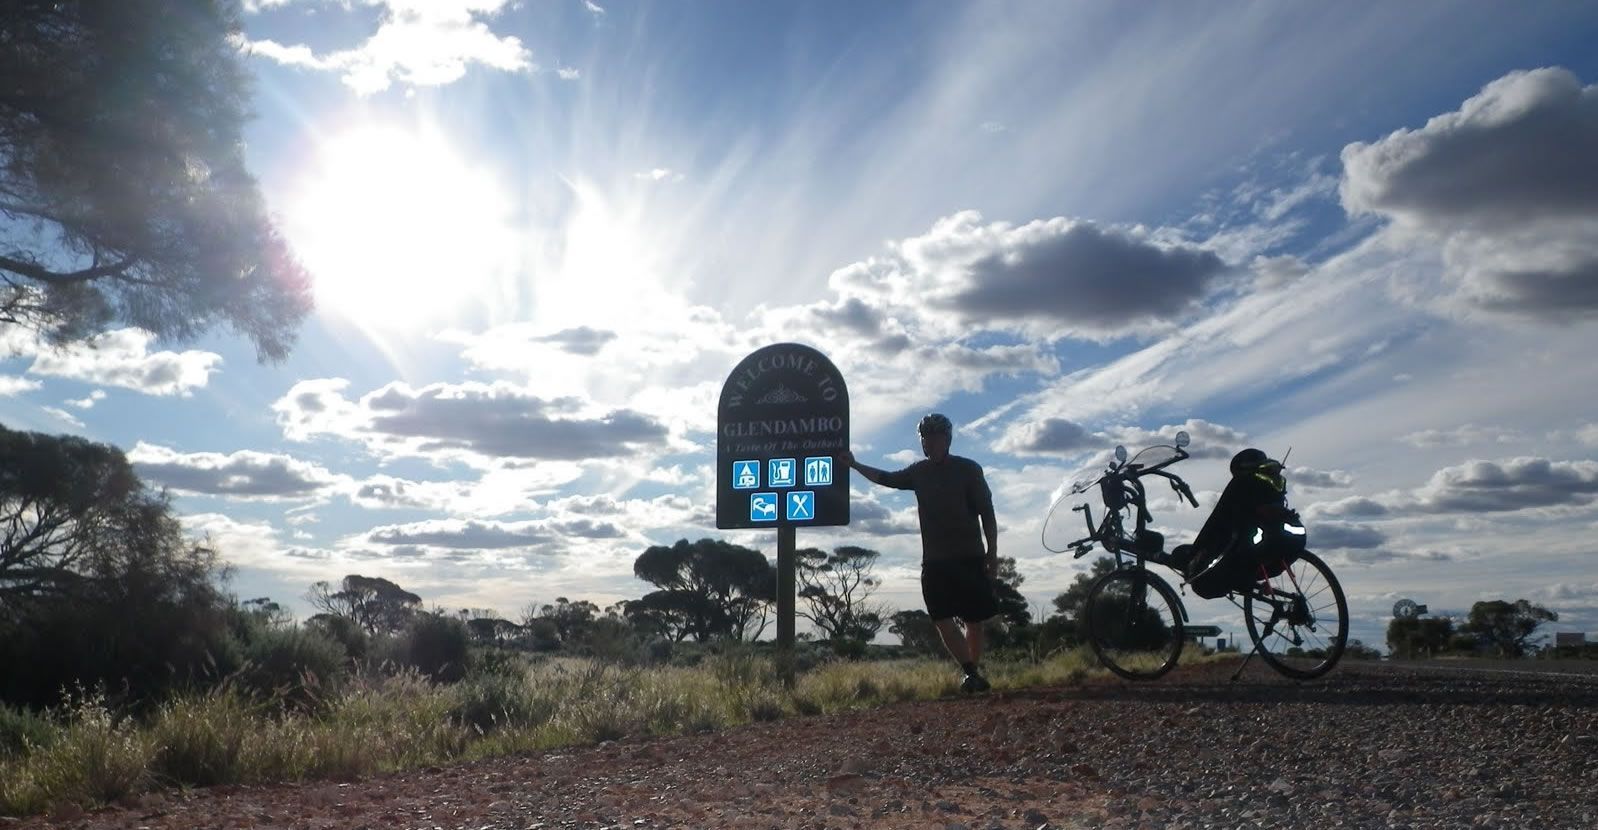 astest solo global circumnavigation by bicycle: Bruce Gordon sets world record (Video)